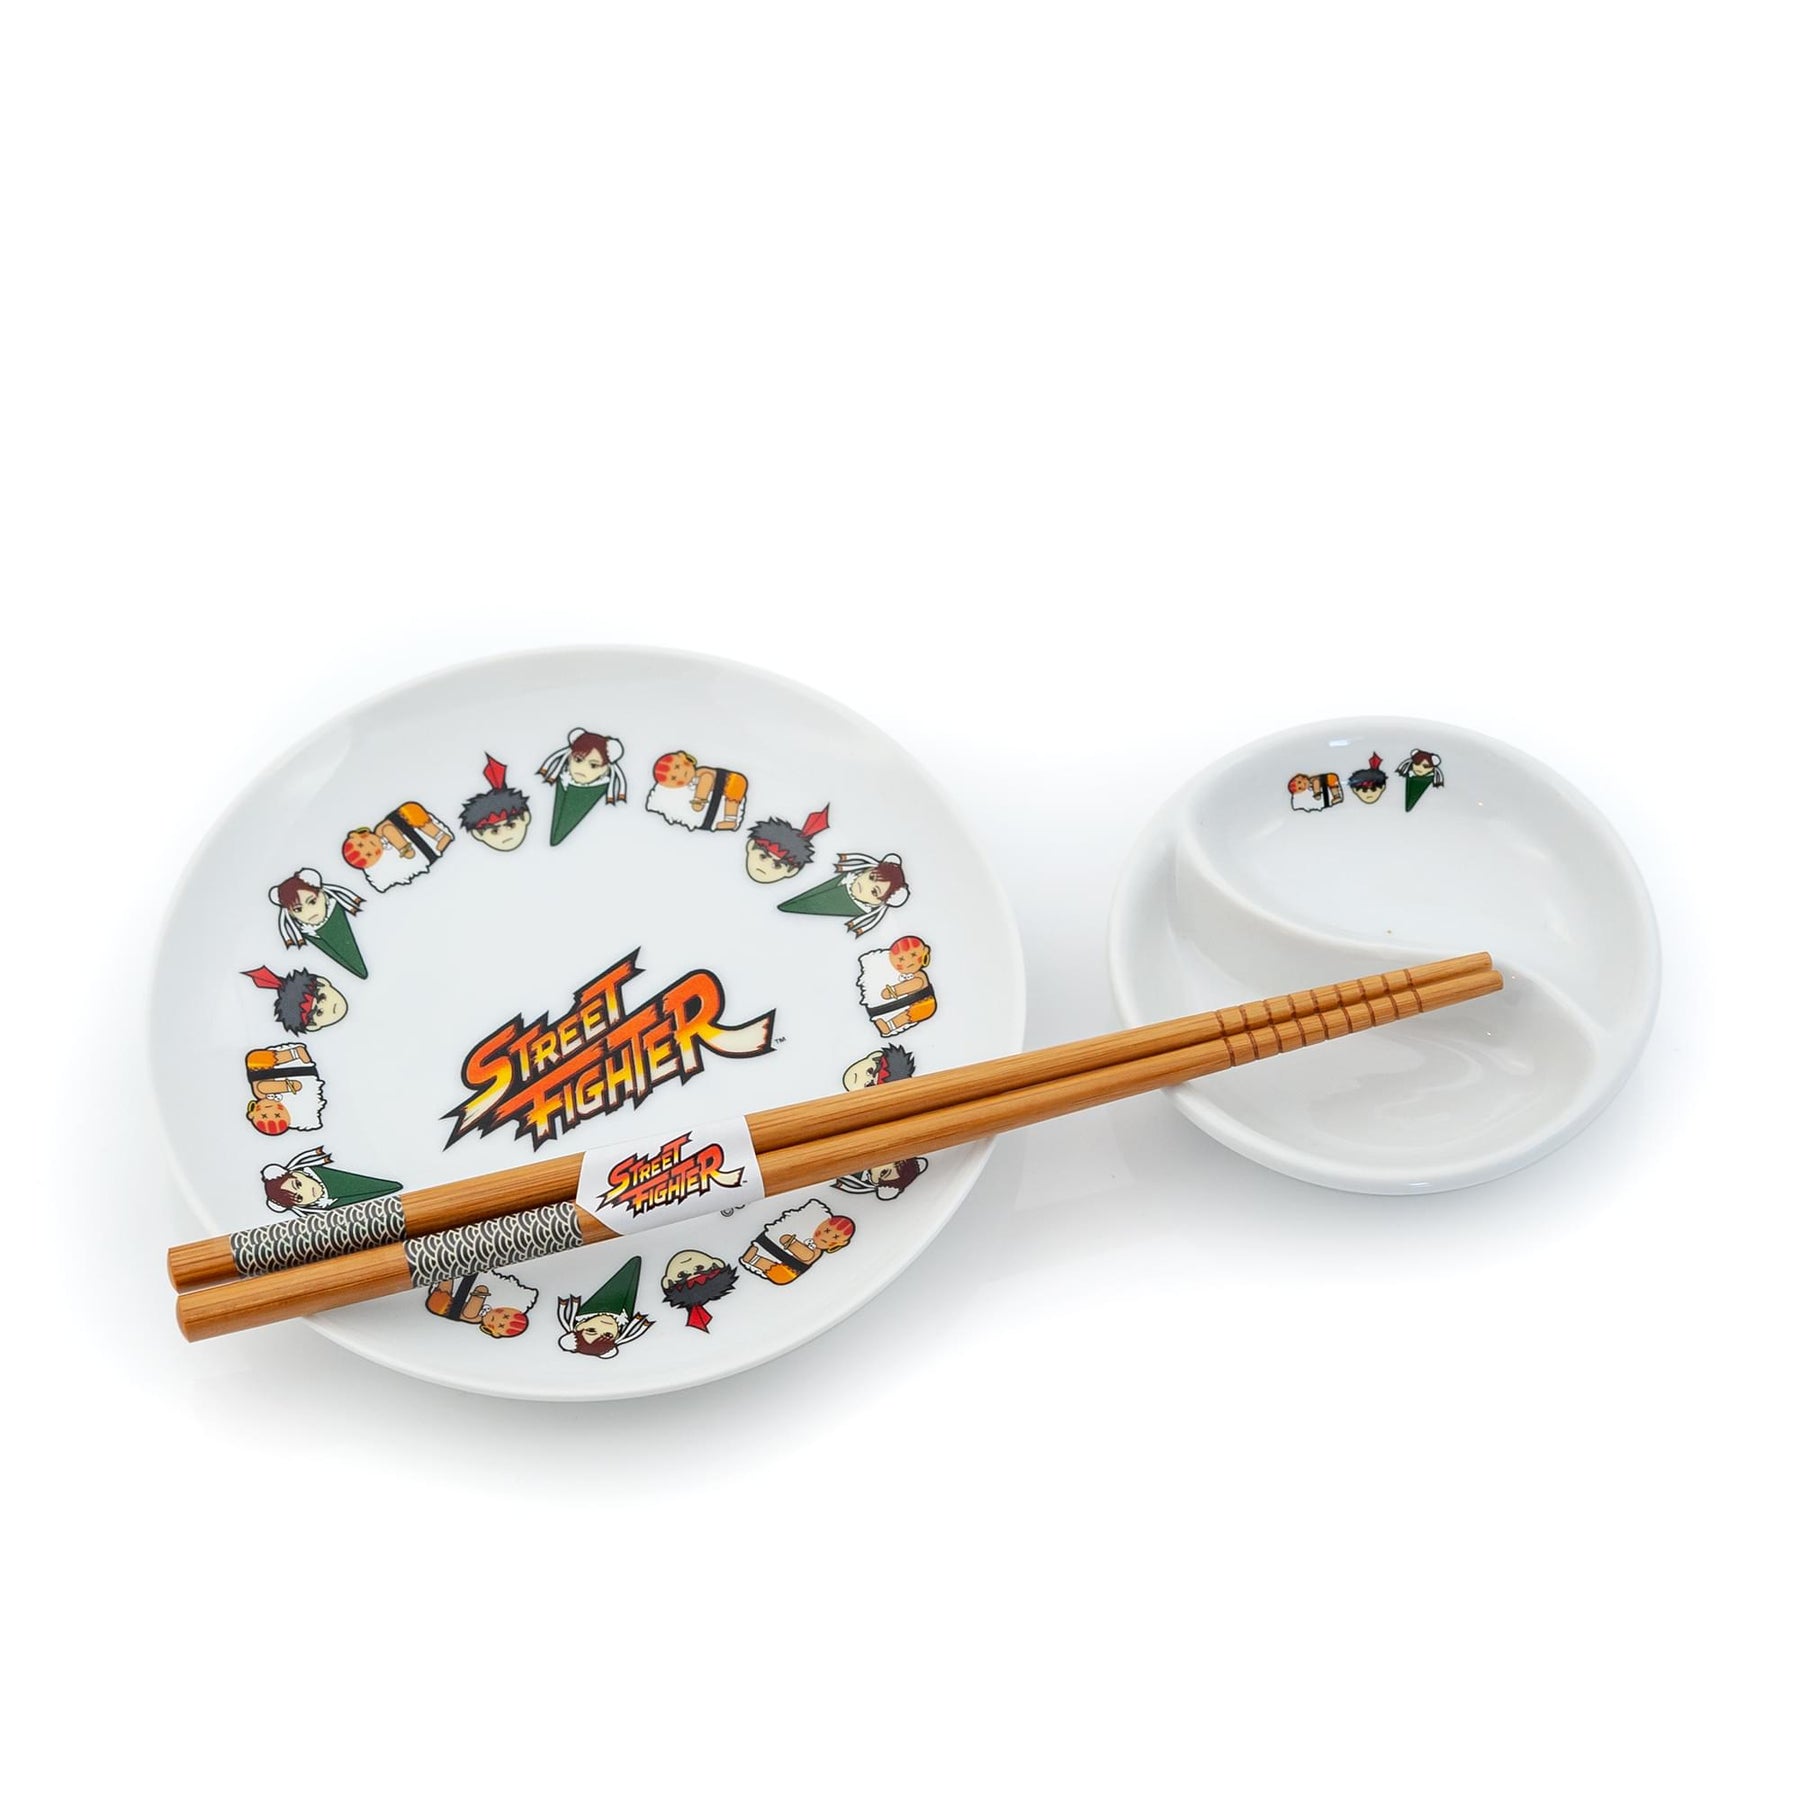 Sushi Making Kit - The Trusted Chef Ⓡ Traditional Sushi Maker Kit with  chopstick trainers